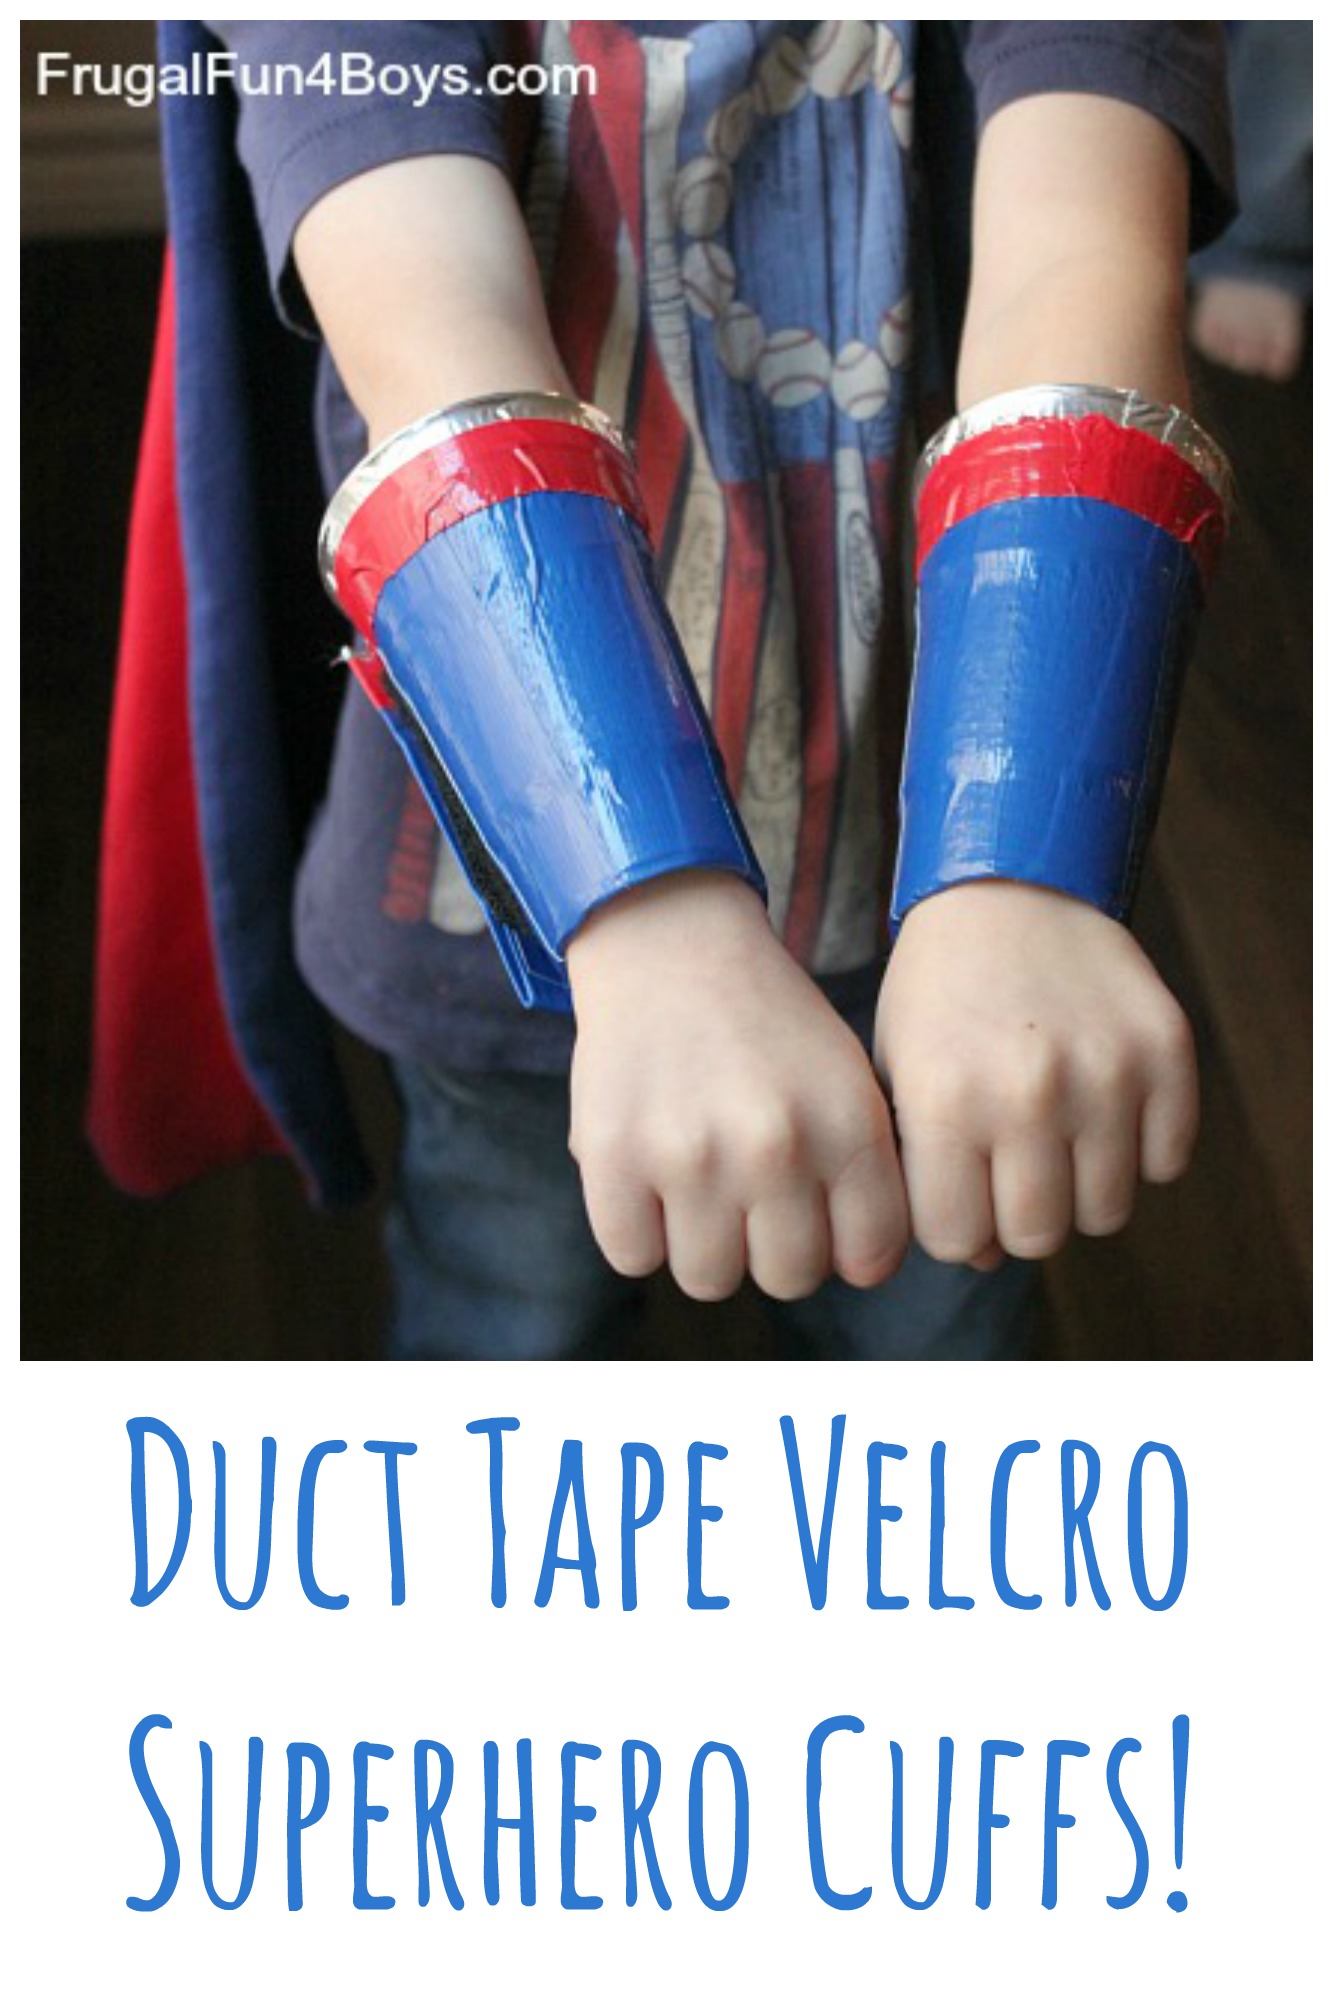 Duct Tape Velcro Superhero Cuffs - They can be taken off and on